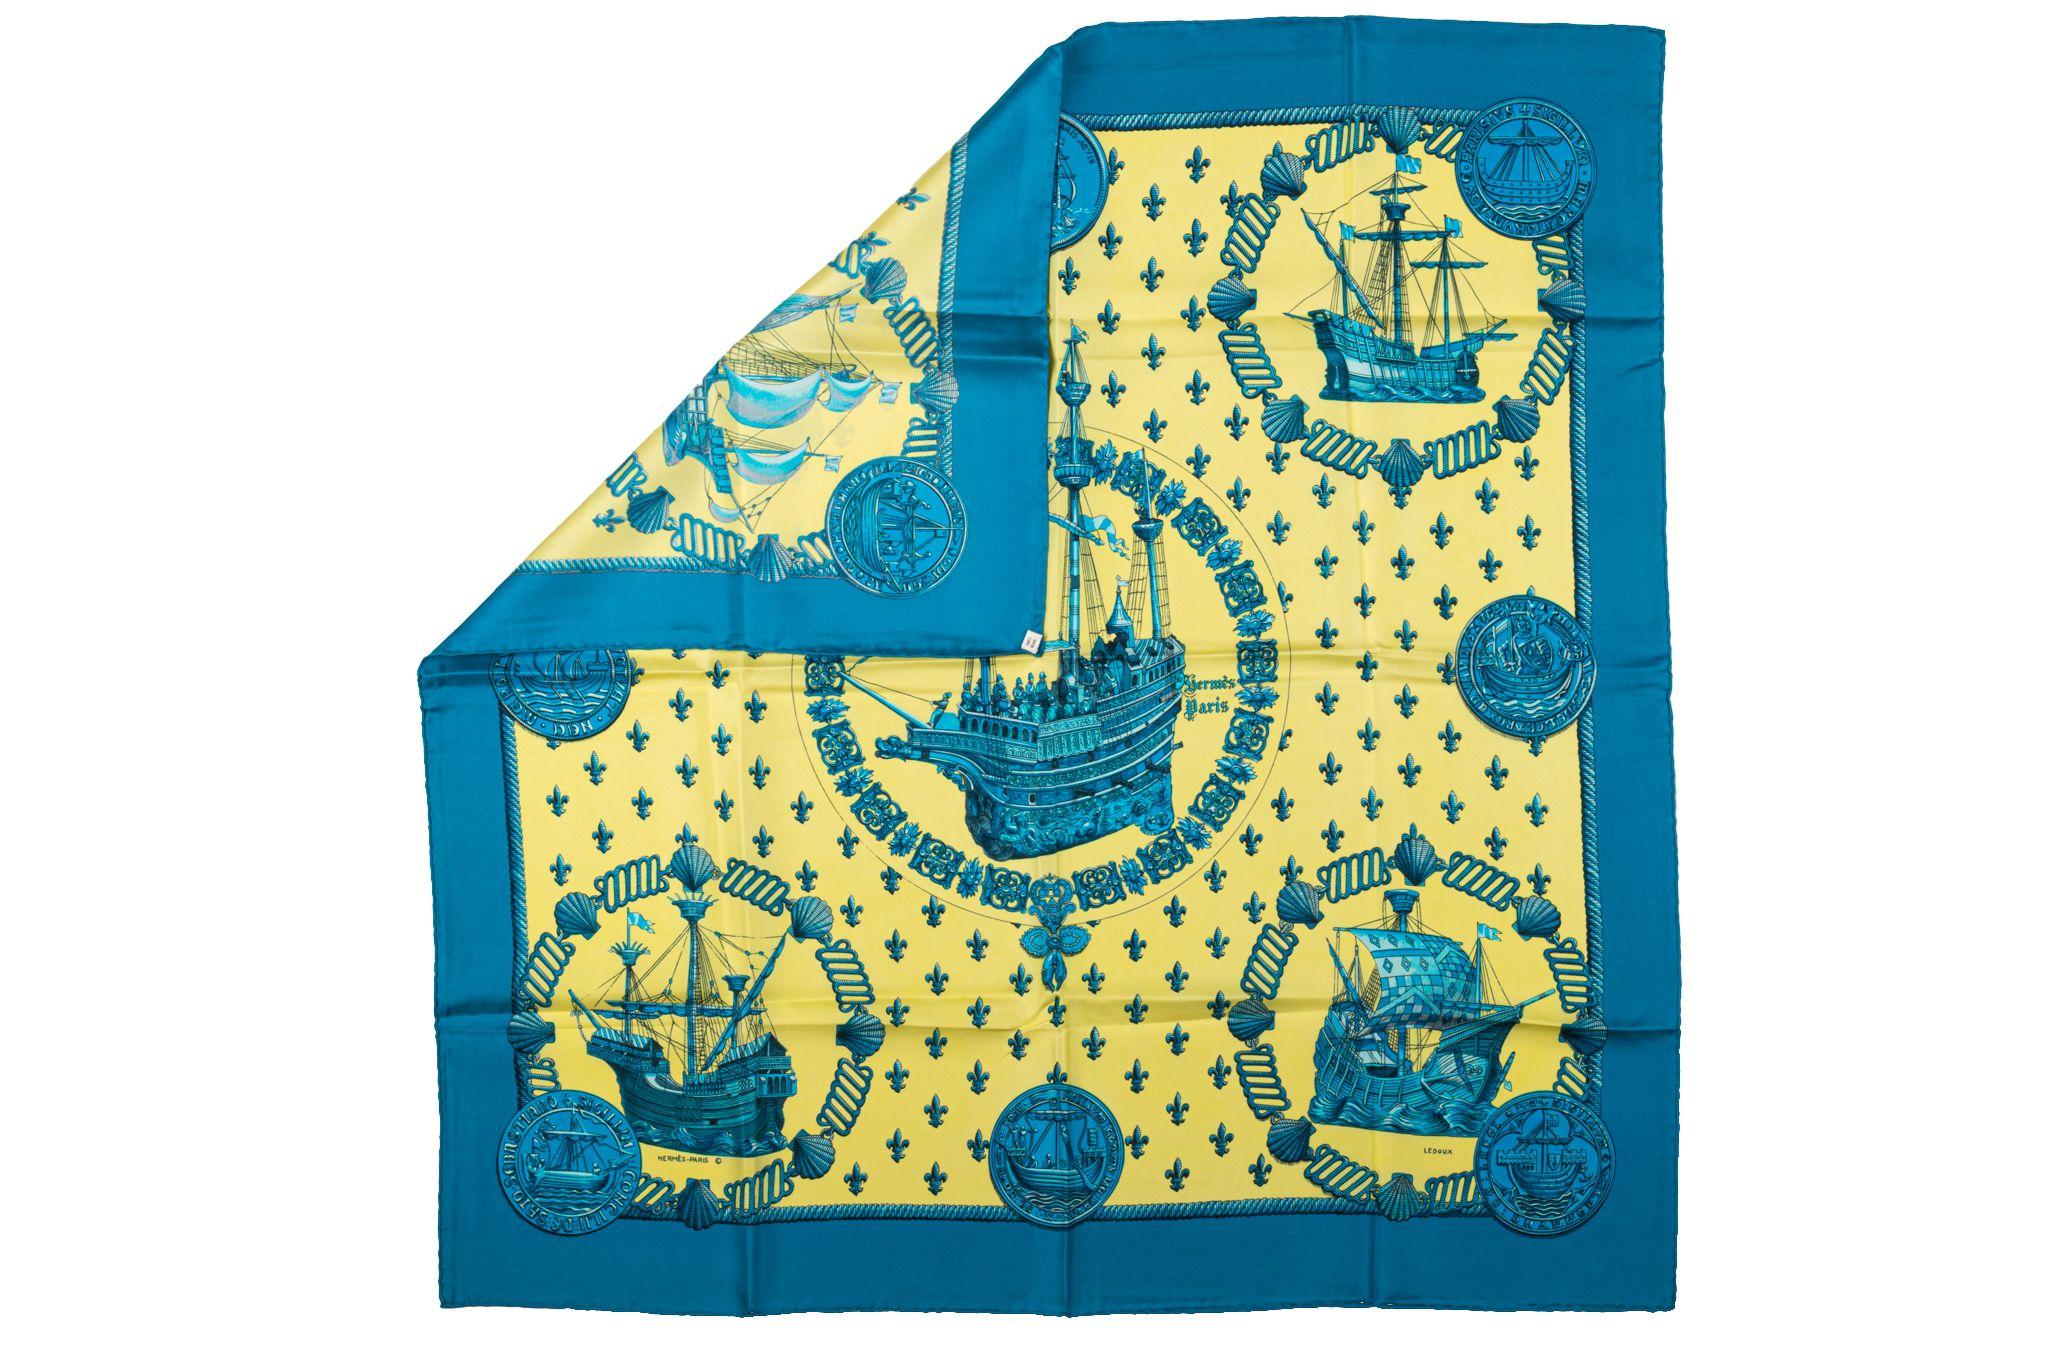 Hermès 100% silk twill Nefs d'Or scarf designed by collectible artist Ledoux. Vibrant blue and yellow colorways. Hand-rolled edges. Does not include box.